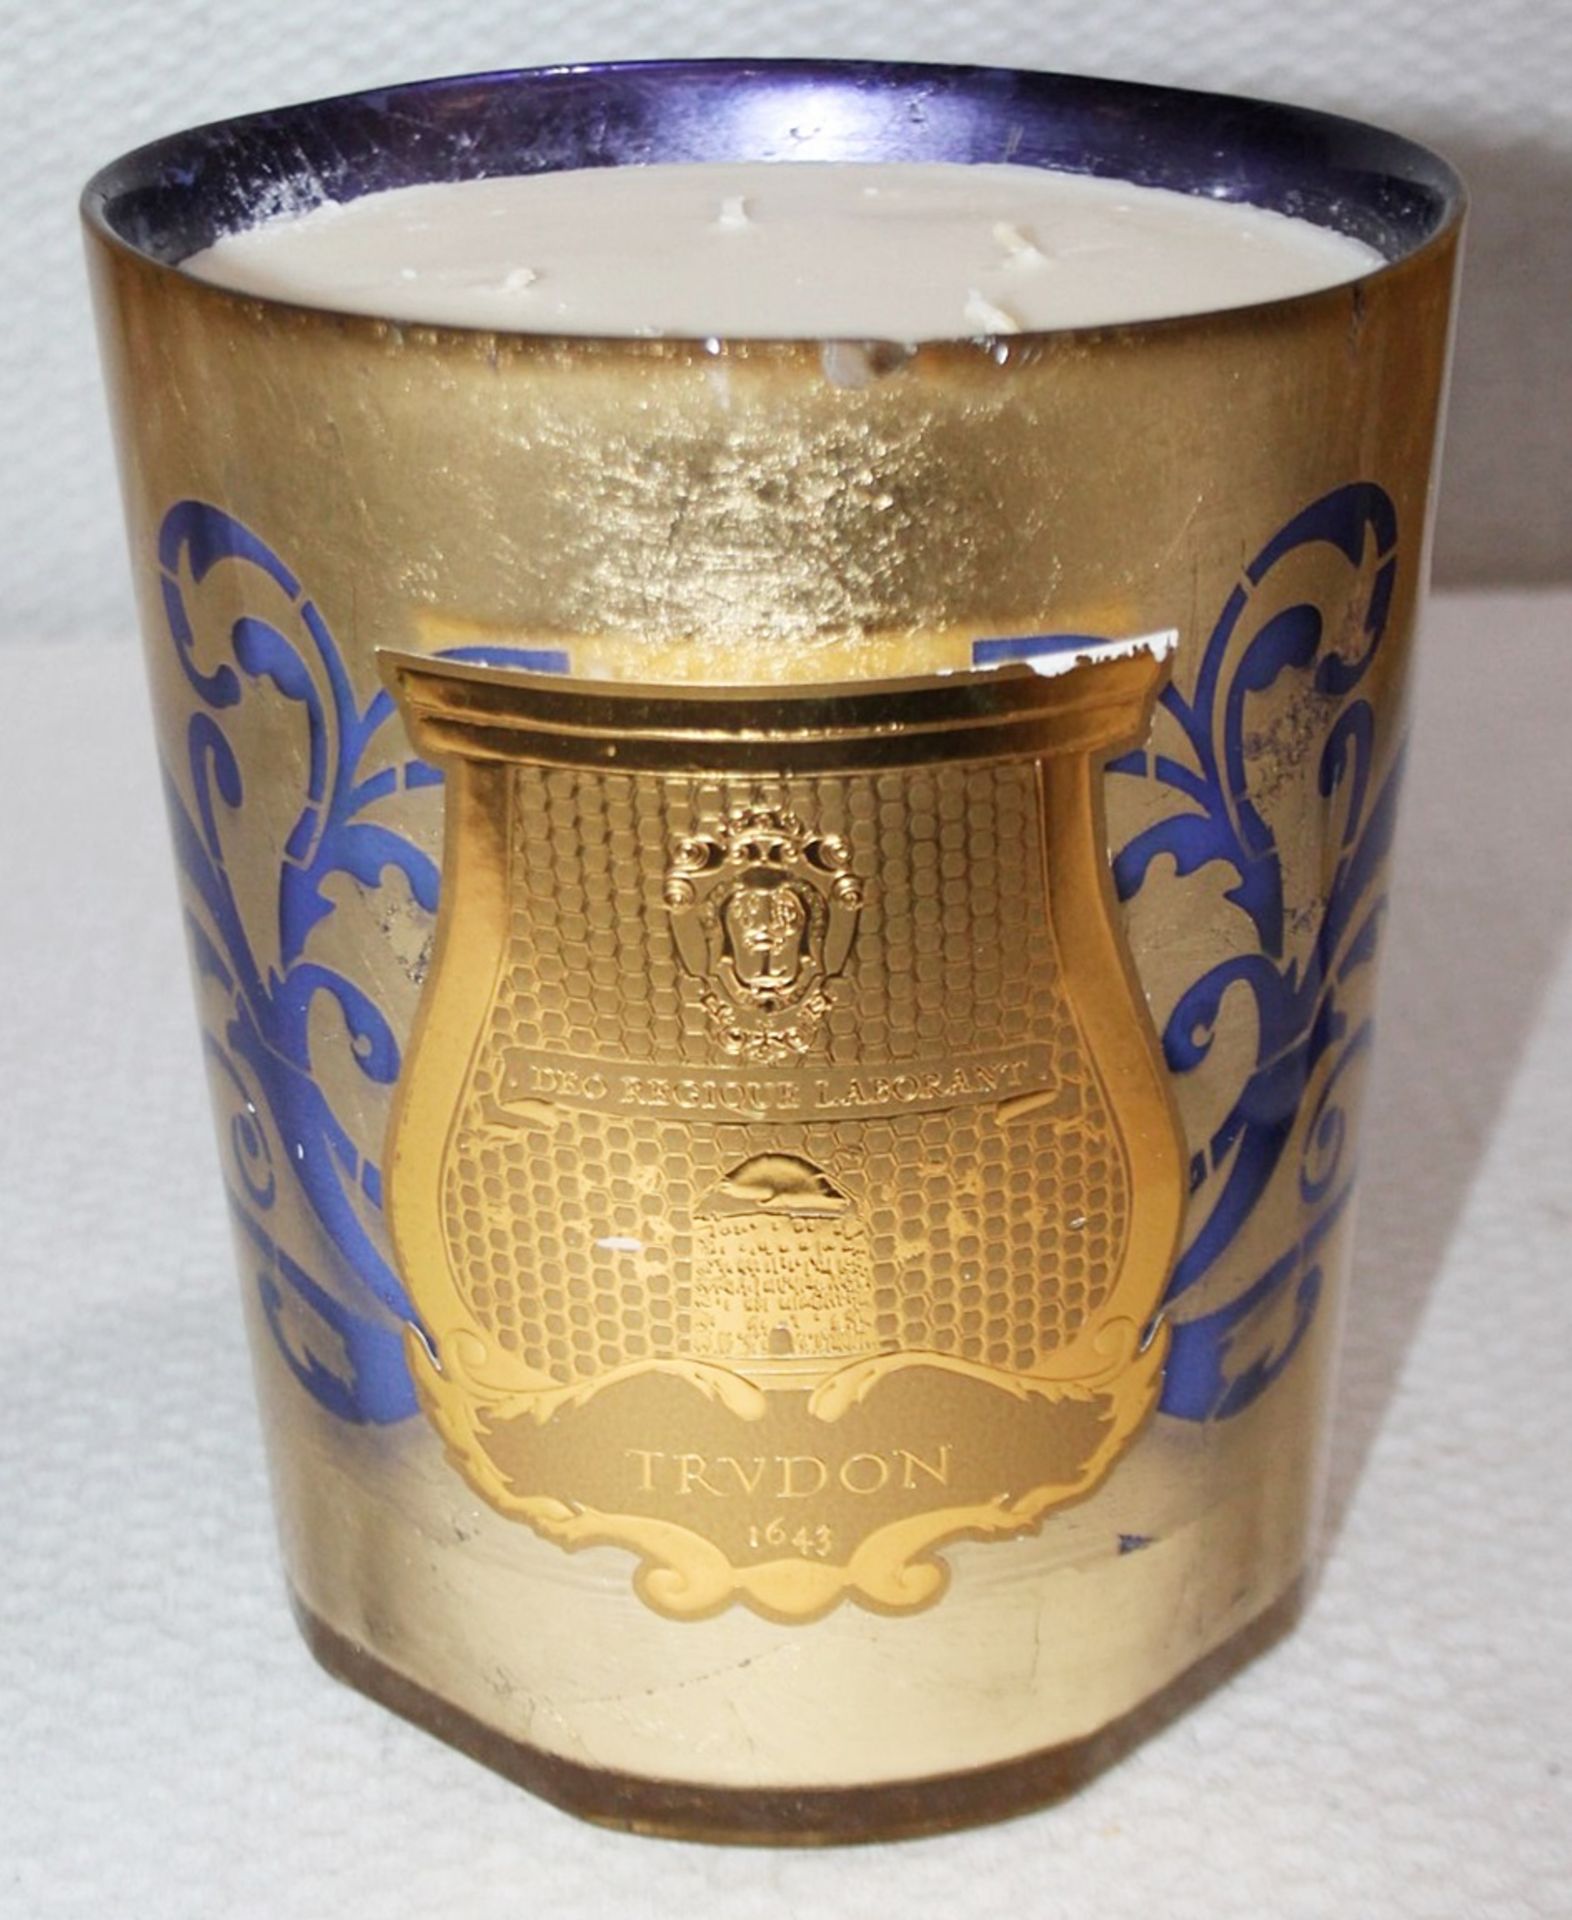 1 x CIRE TRUDON 'Christmas Fir' Great Candle (800g) - Original Price £550.00 - Unused Boxed - Image 5 of 9